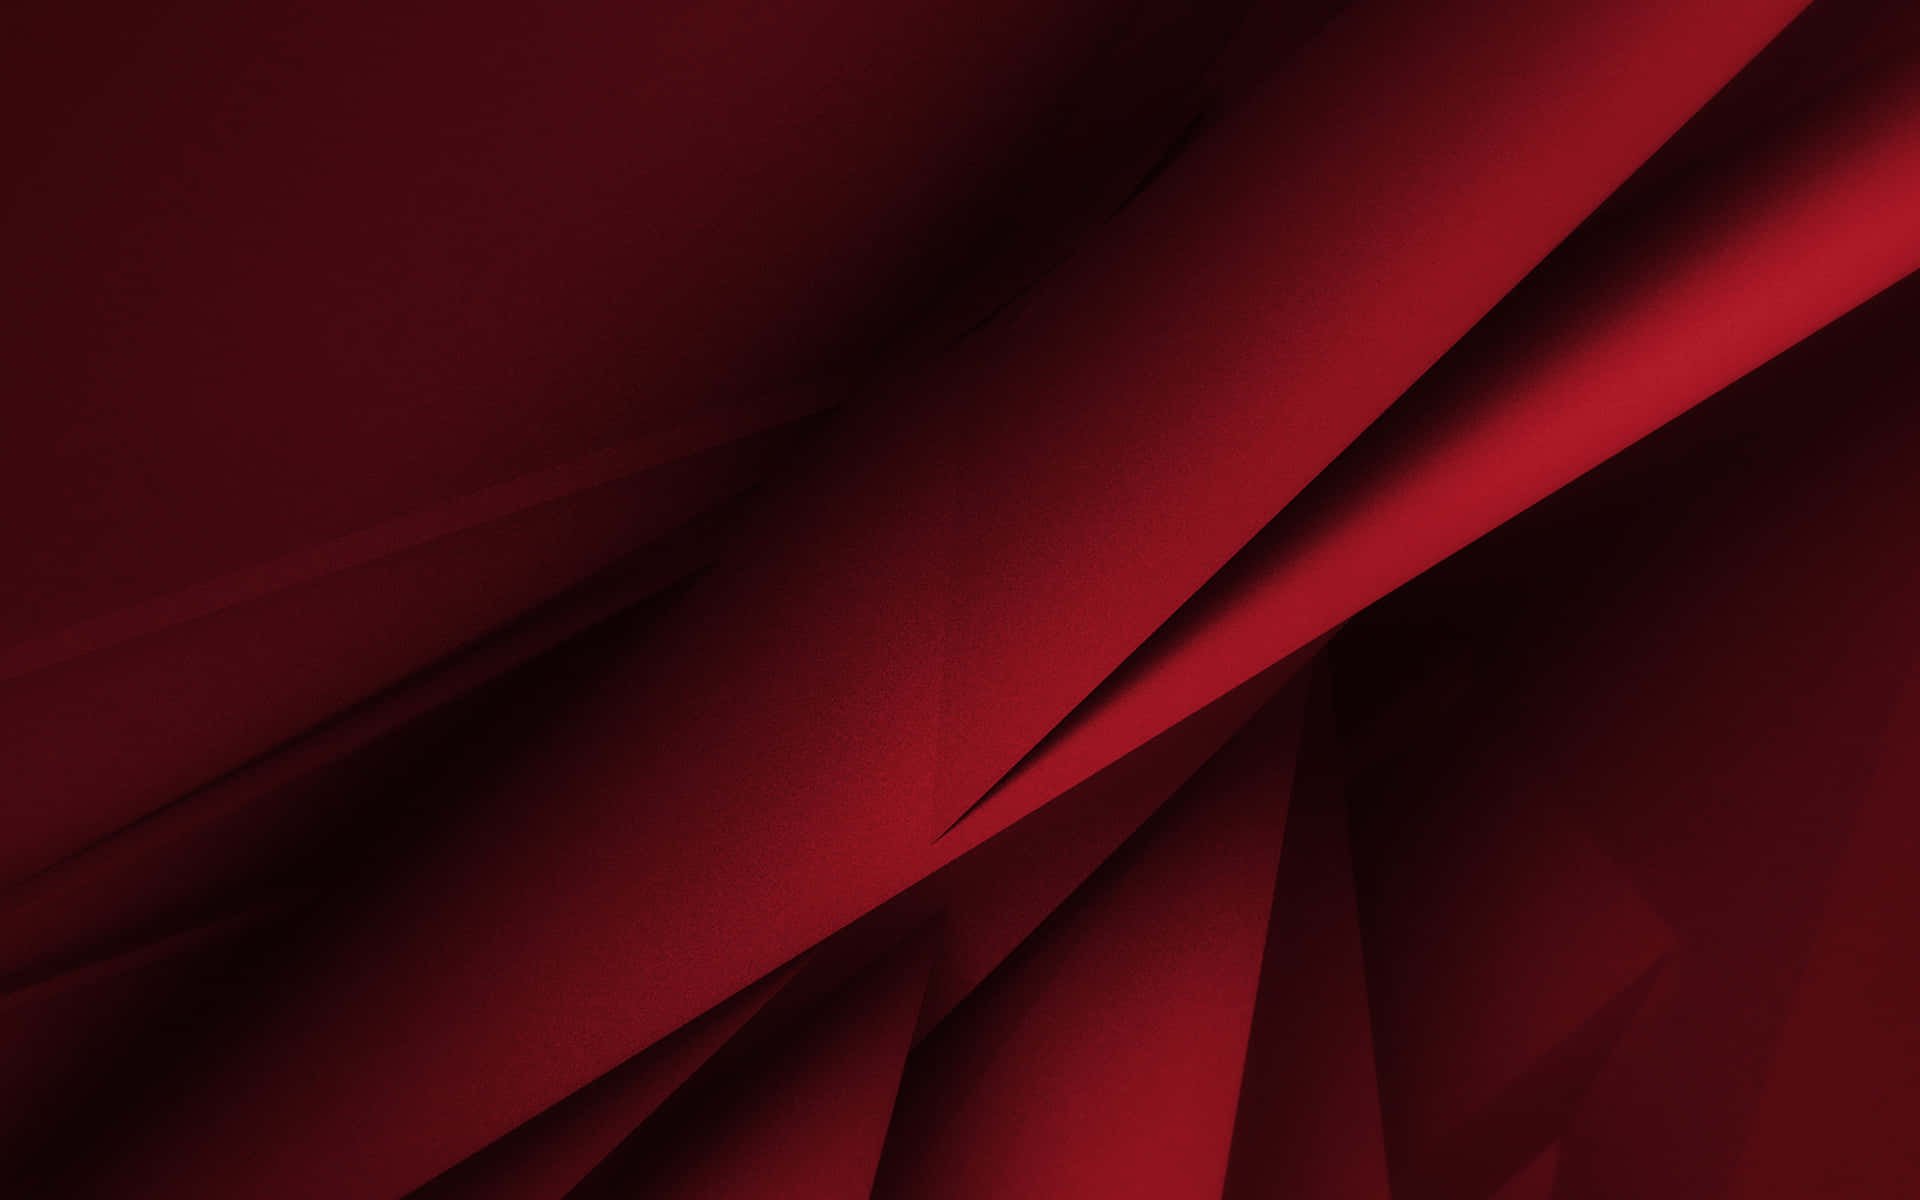 "Abstract red color background, with shapes slowly shifting in shades and tones"